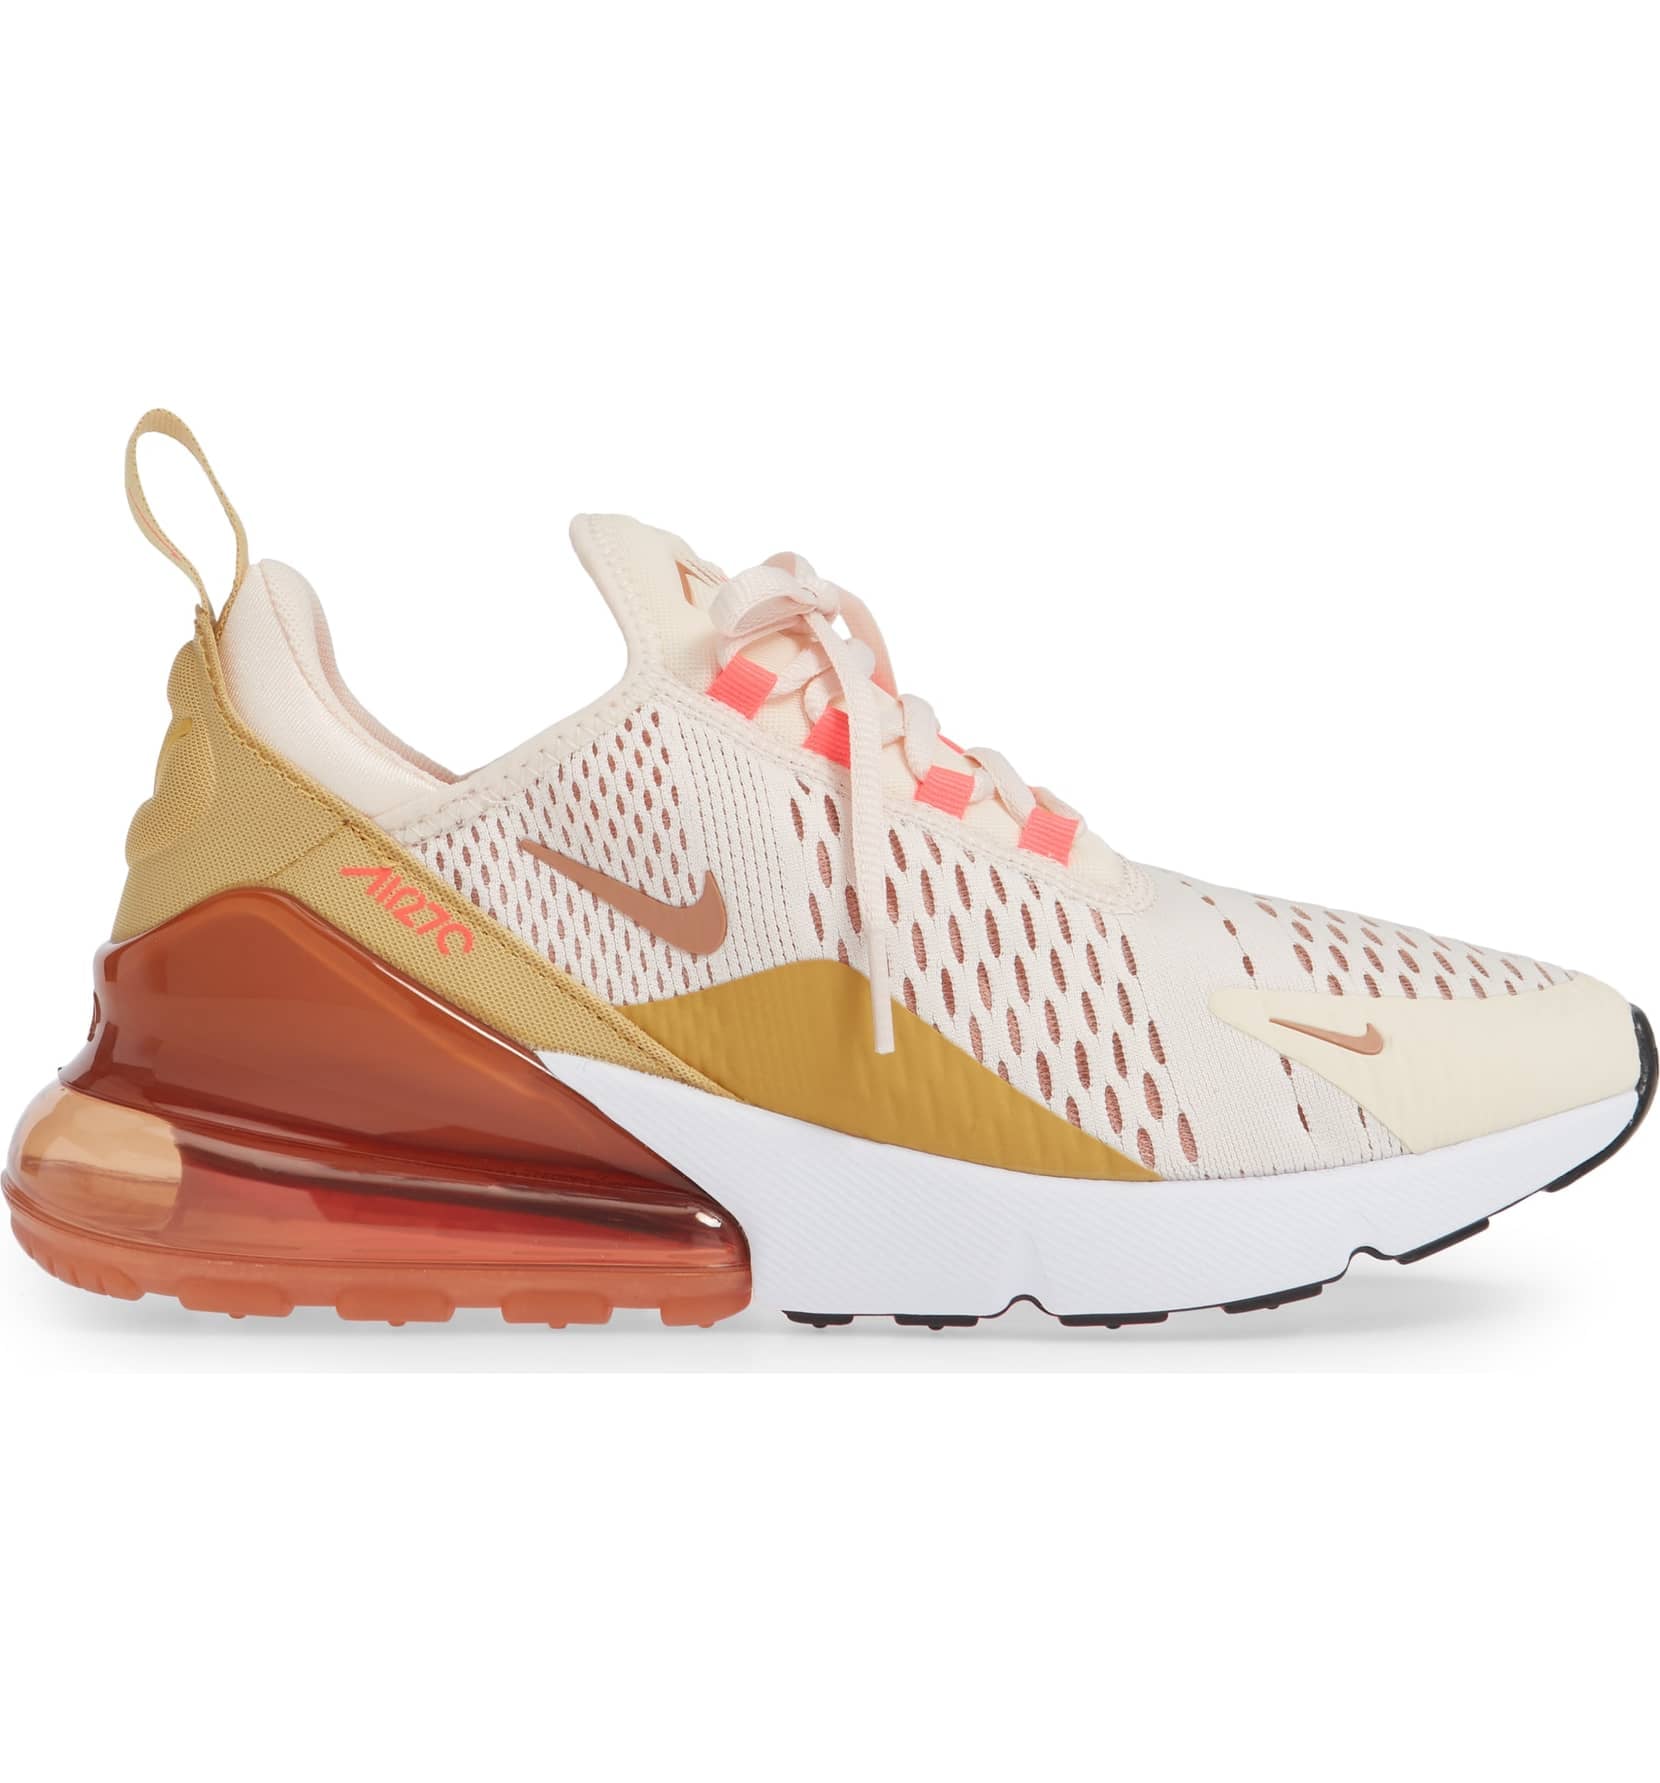 nike air max 270 good for working out